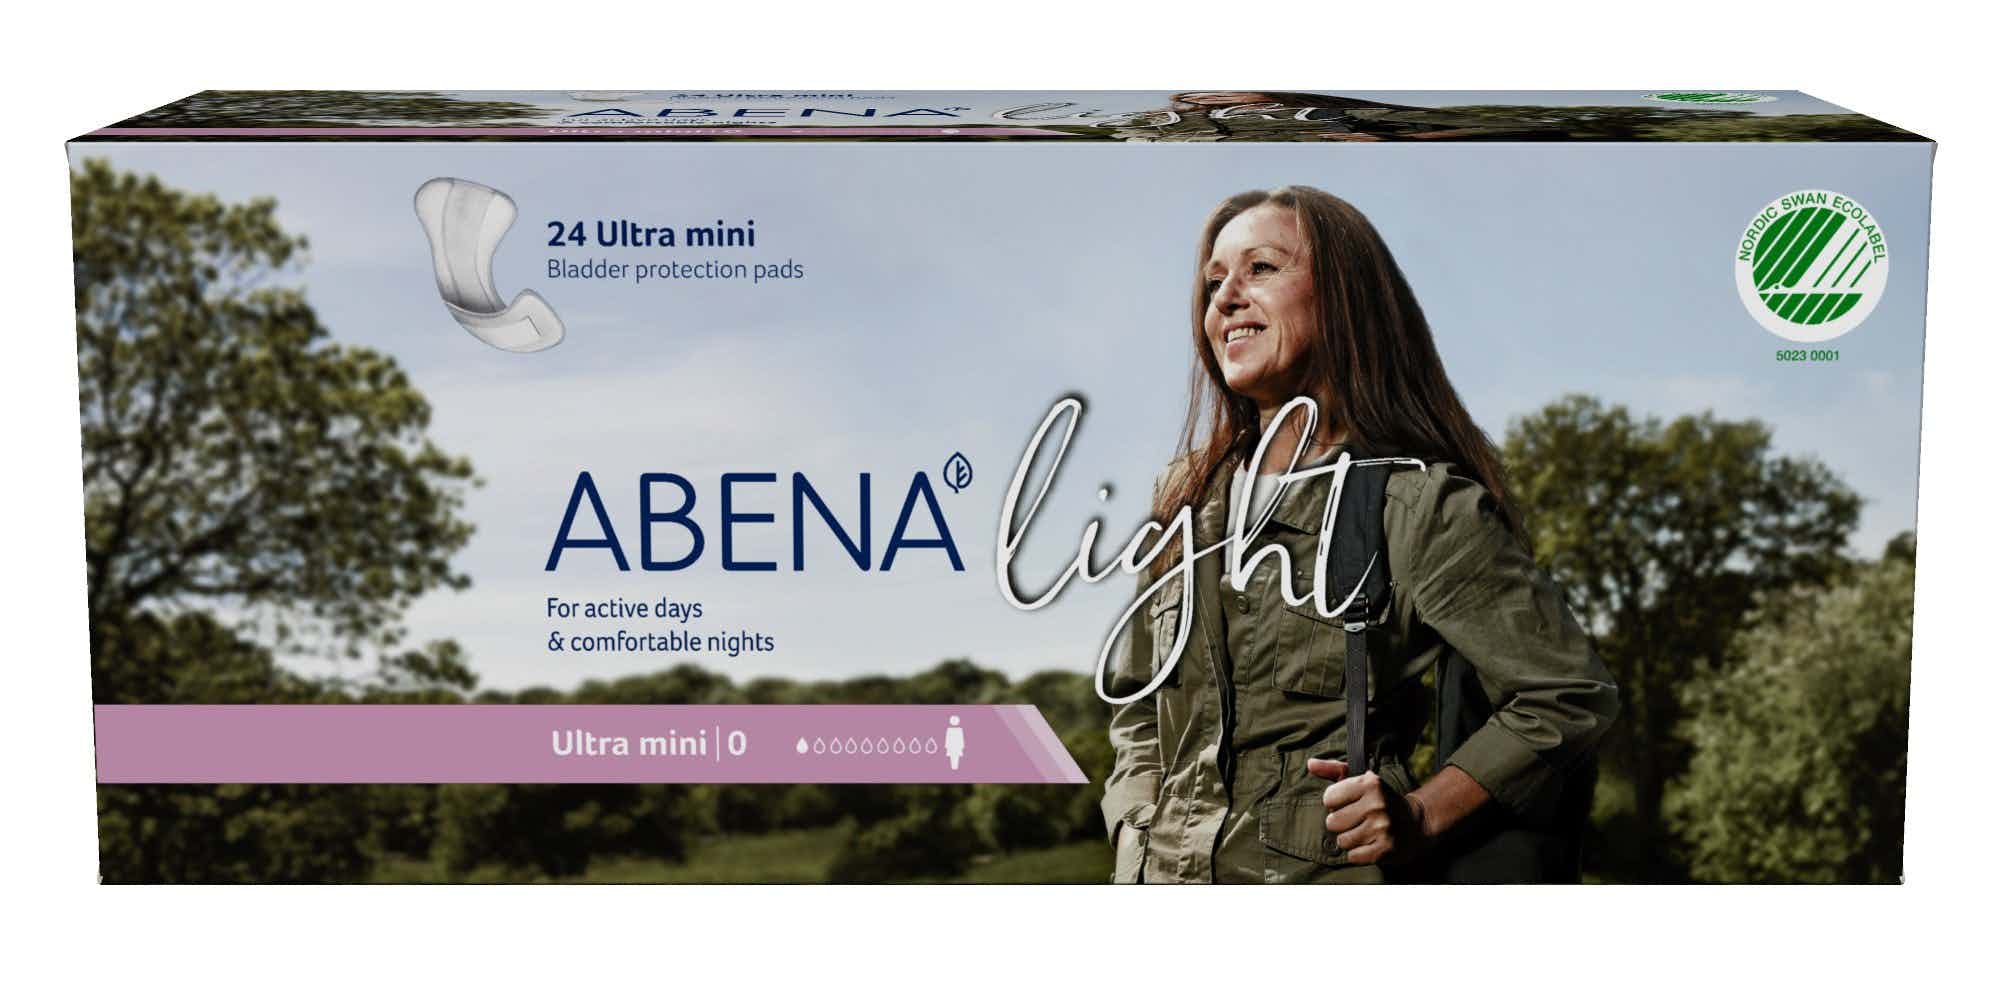 Abena Light Ultra Mini Unisex Adult Bladder Control Pad, Light Absorbency, 1000005436, One Size Fits Most -  Case of 240 Pads (10 Bags)